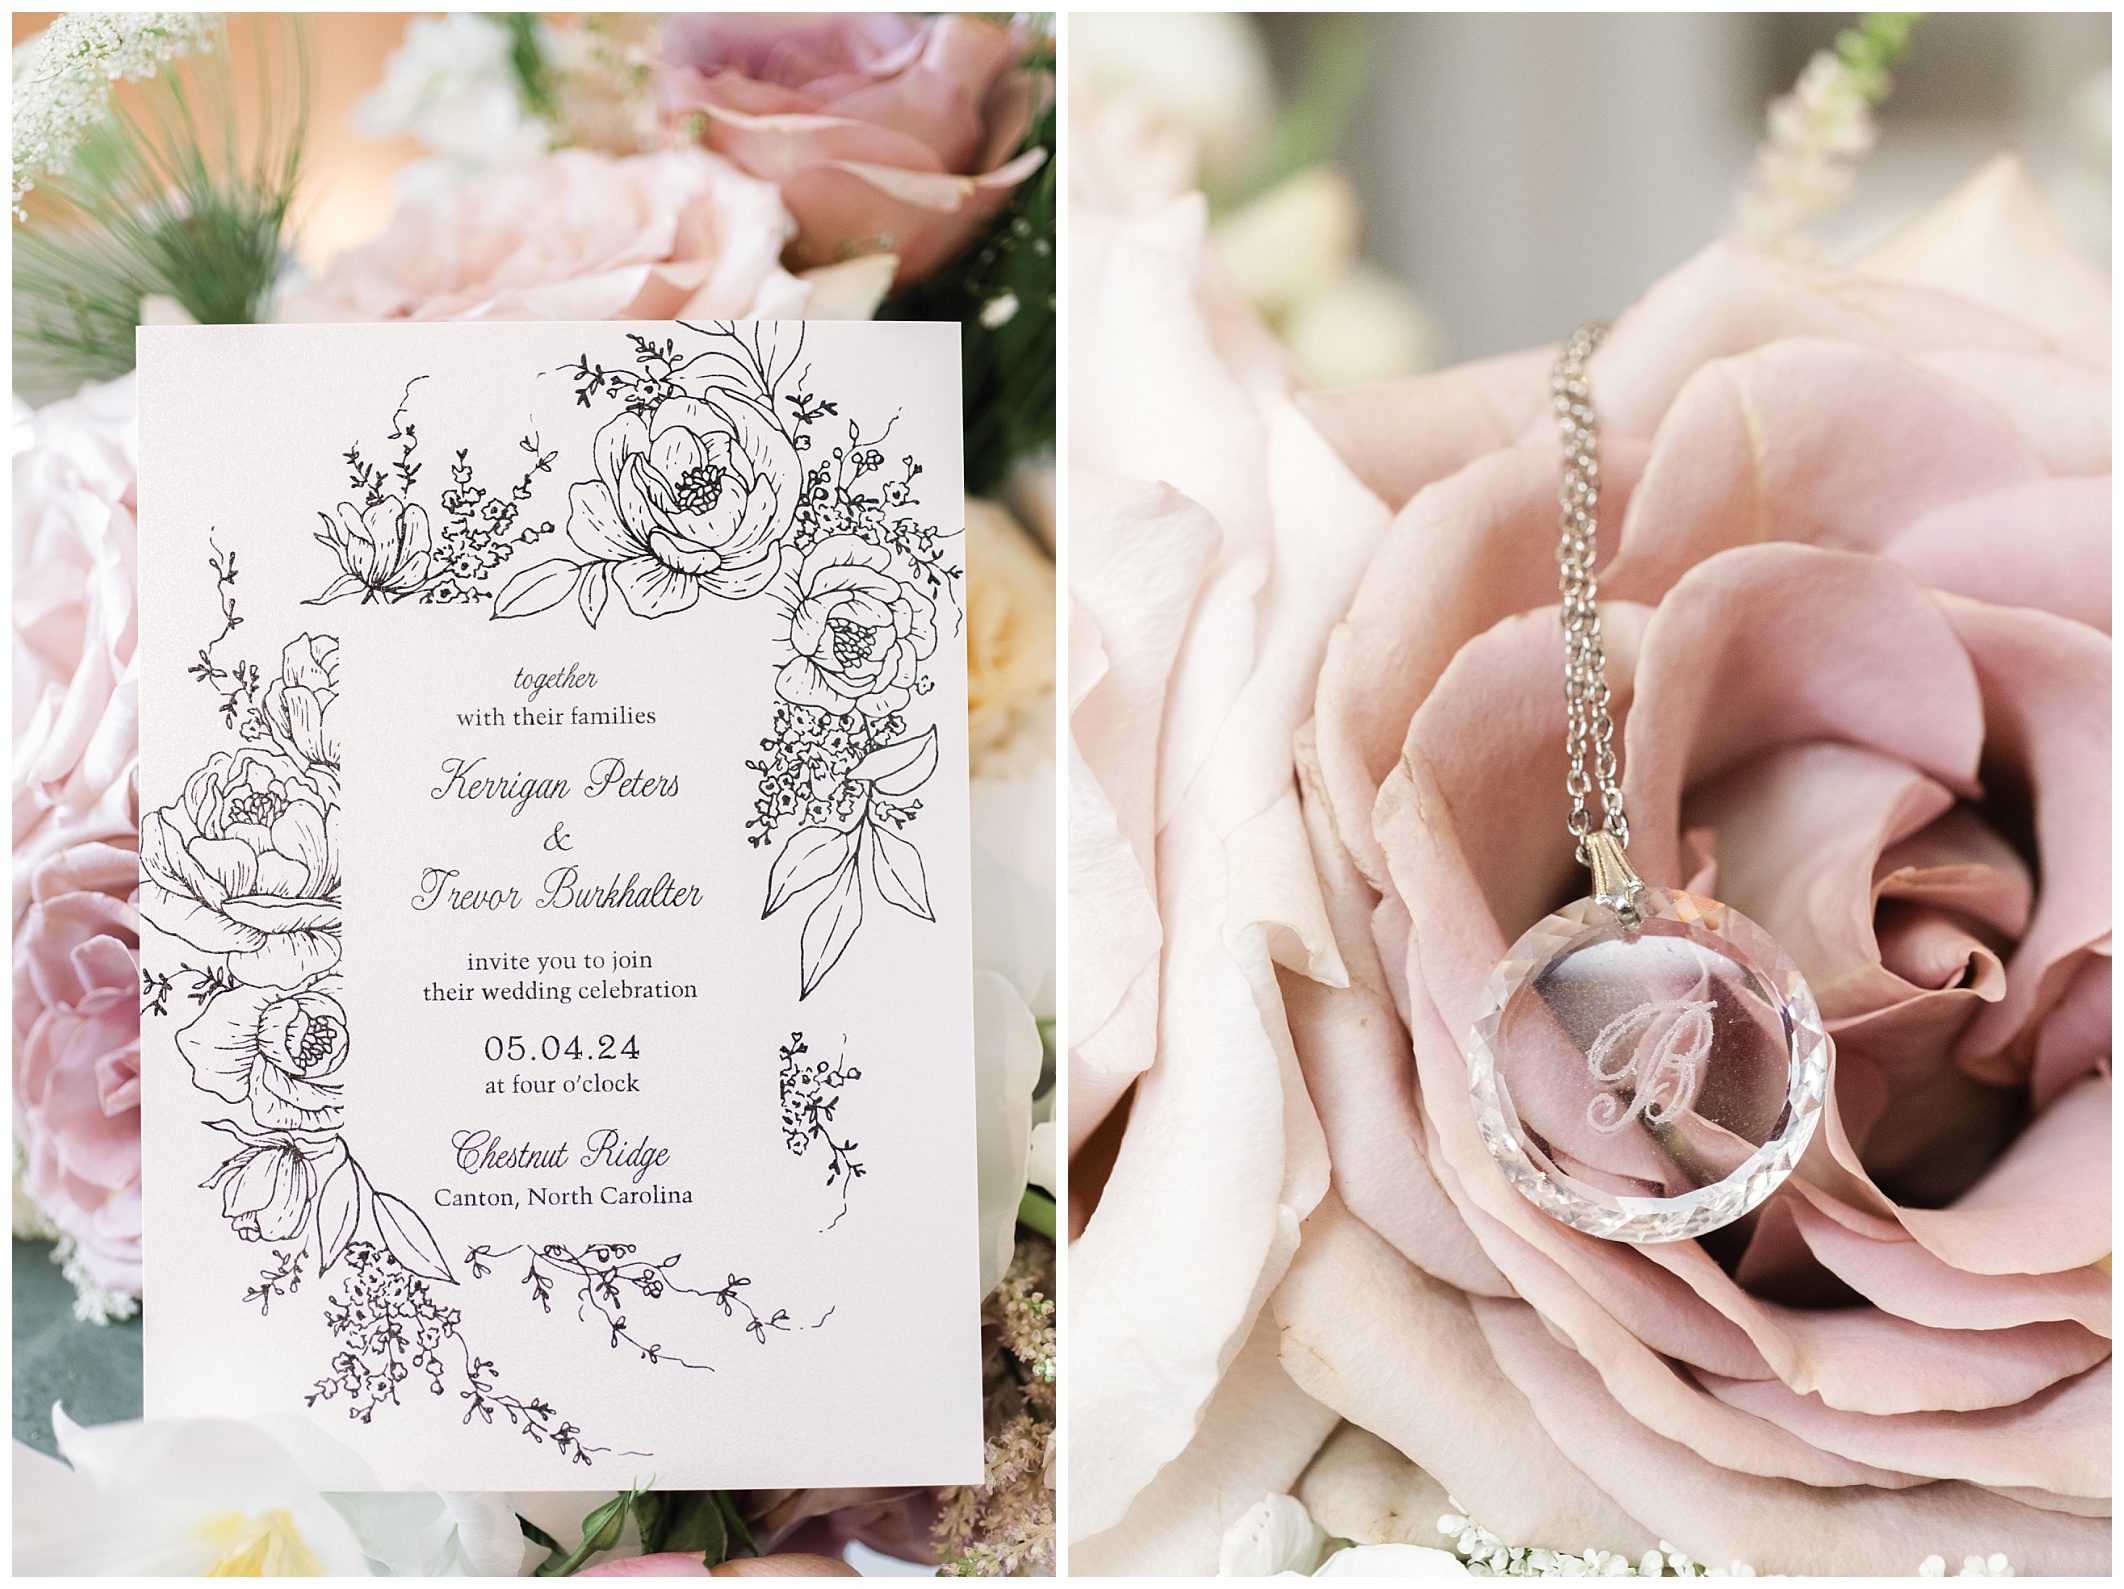 Elegant mountain wedding invitation with floral illustrations beside a close-up of a pendant with an initial "a" resting on a rose.